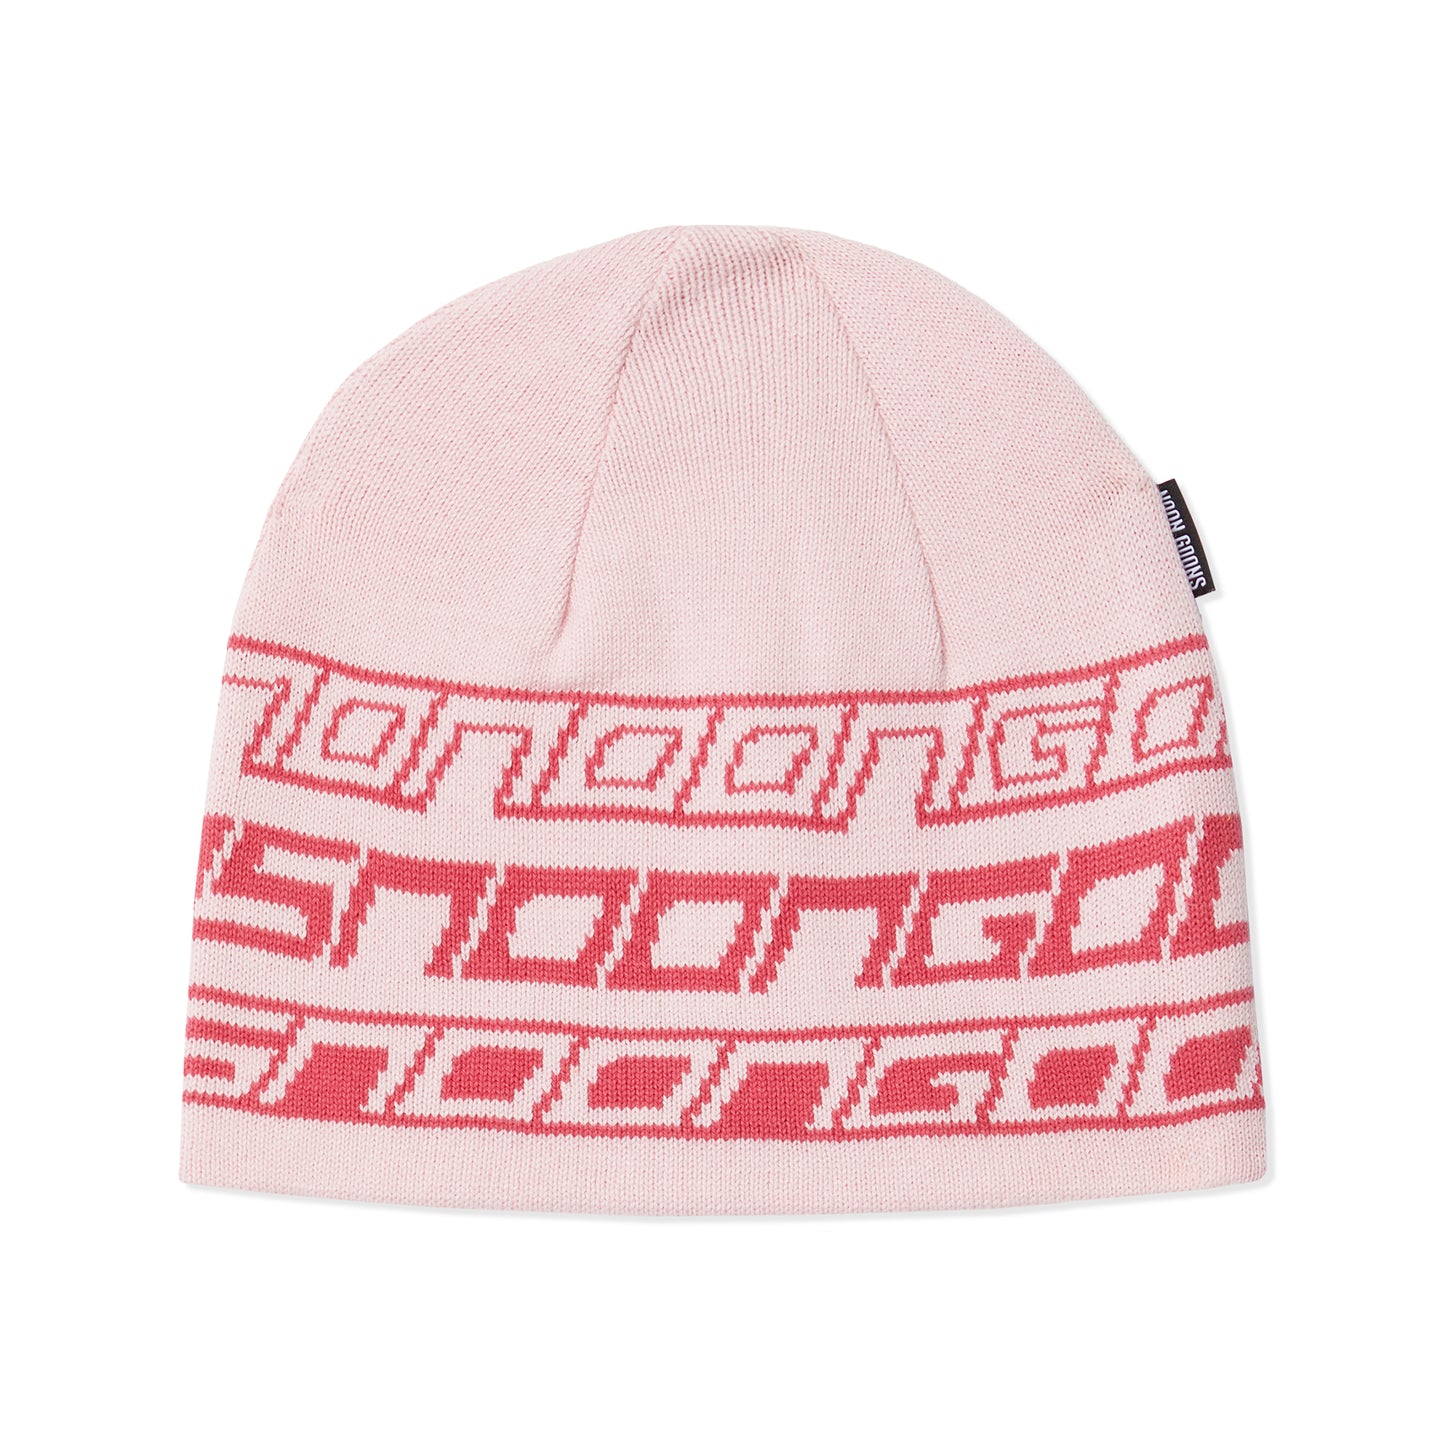 Noon Goons Tricky Beanie (Pink)